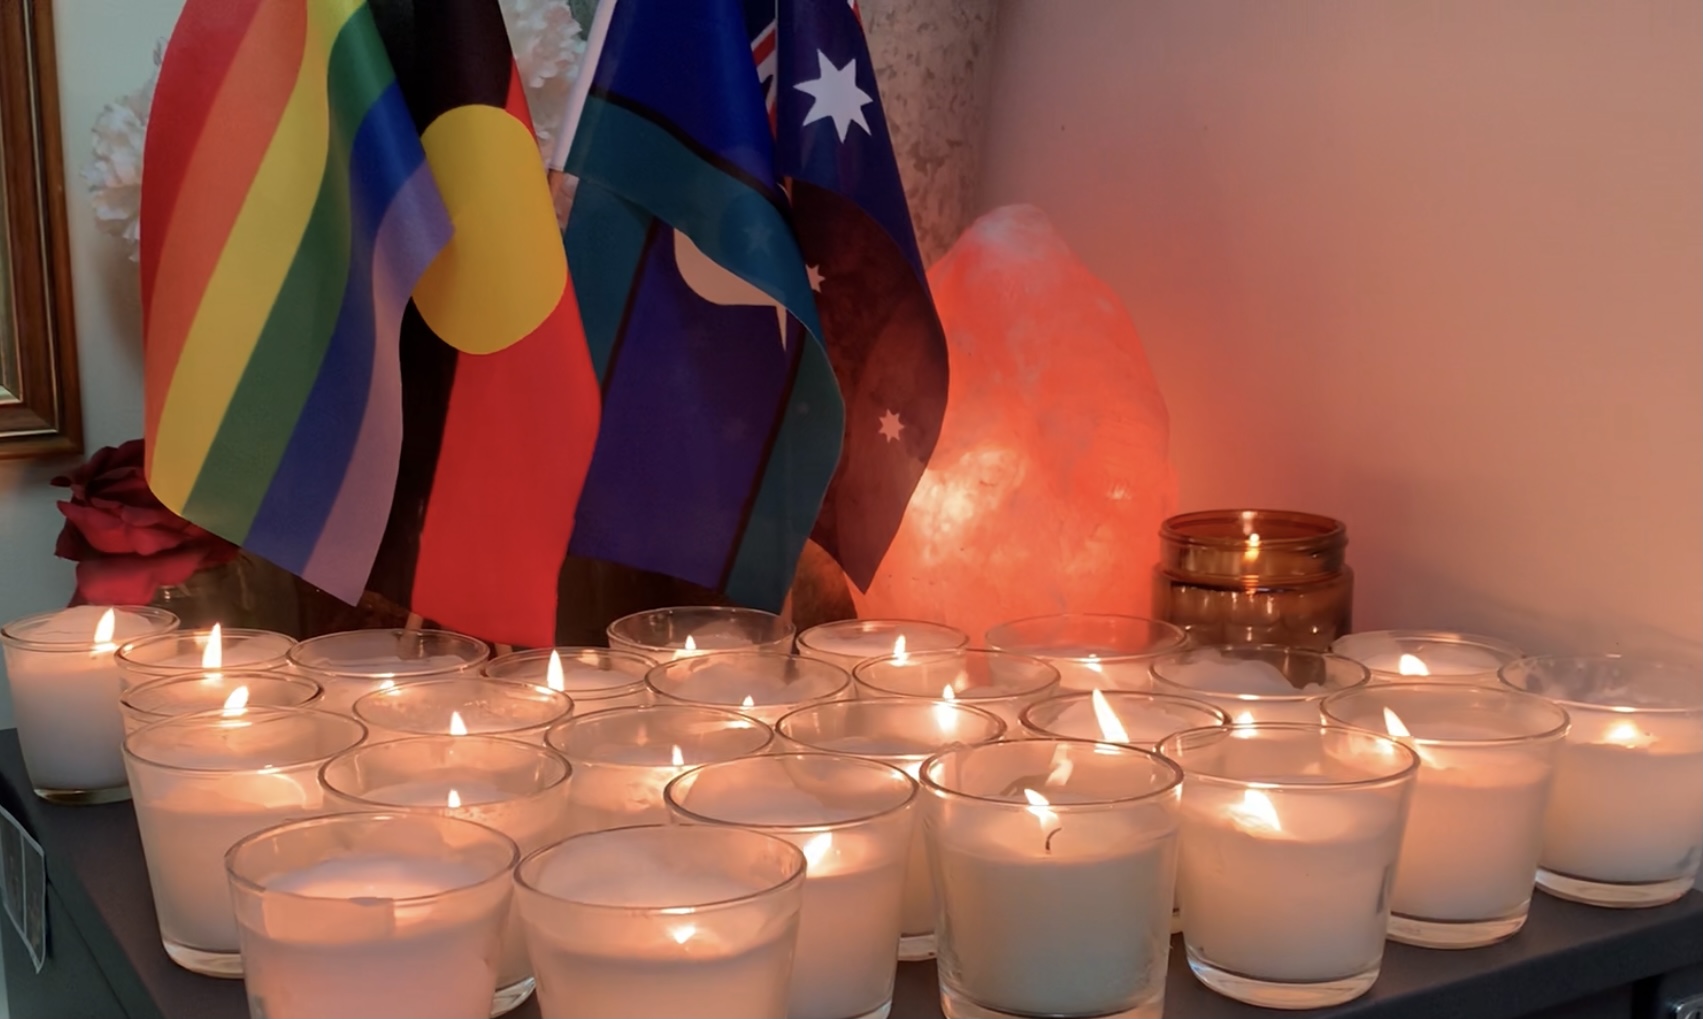 25 votive candles burning with the LGBTIQ, Aboriginal, Torres Strait Island and Australian flags hanging behind them.